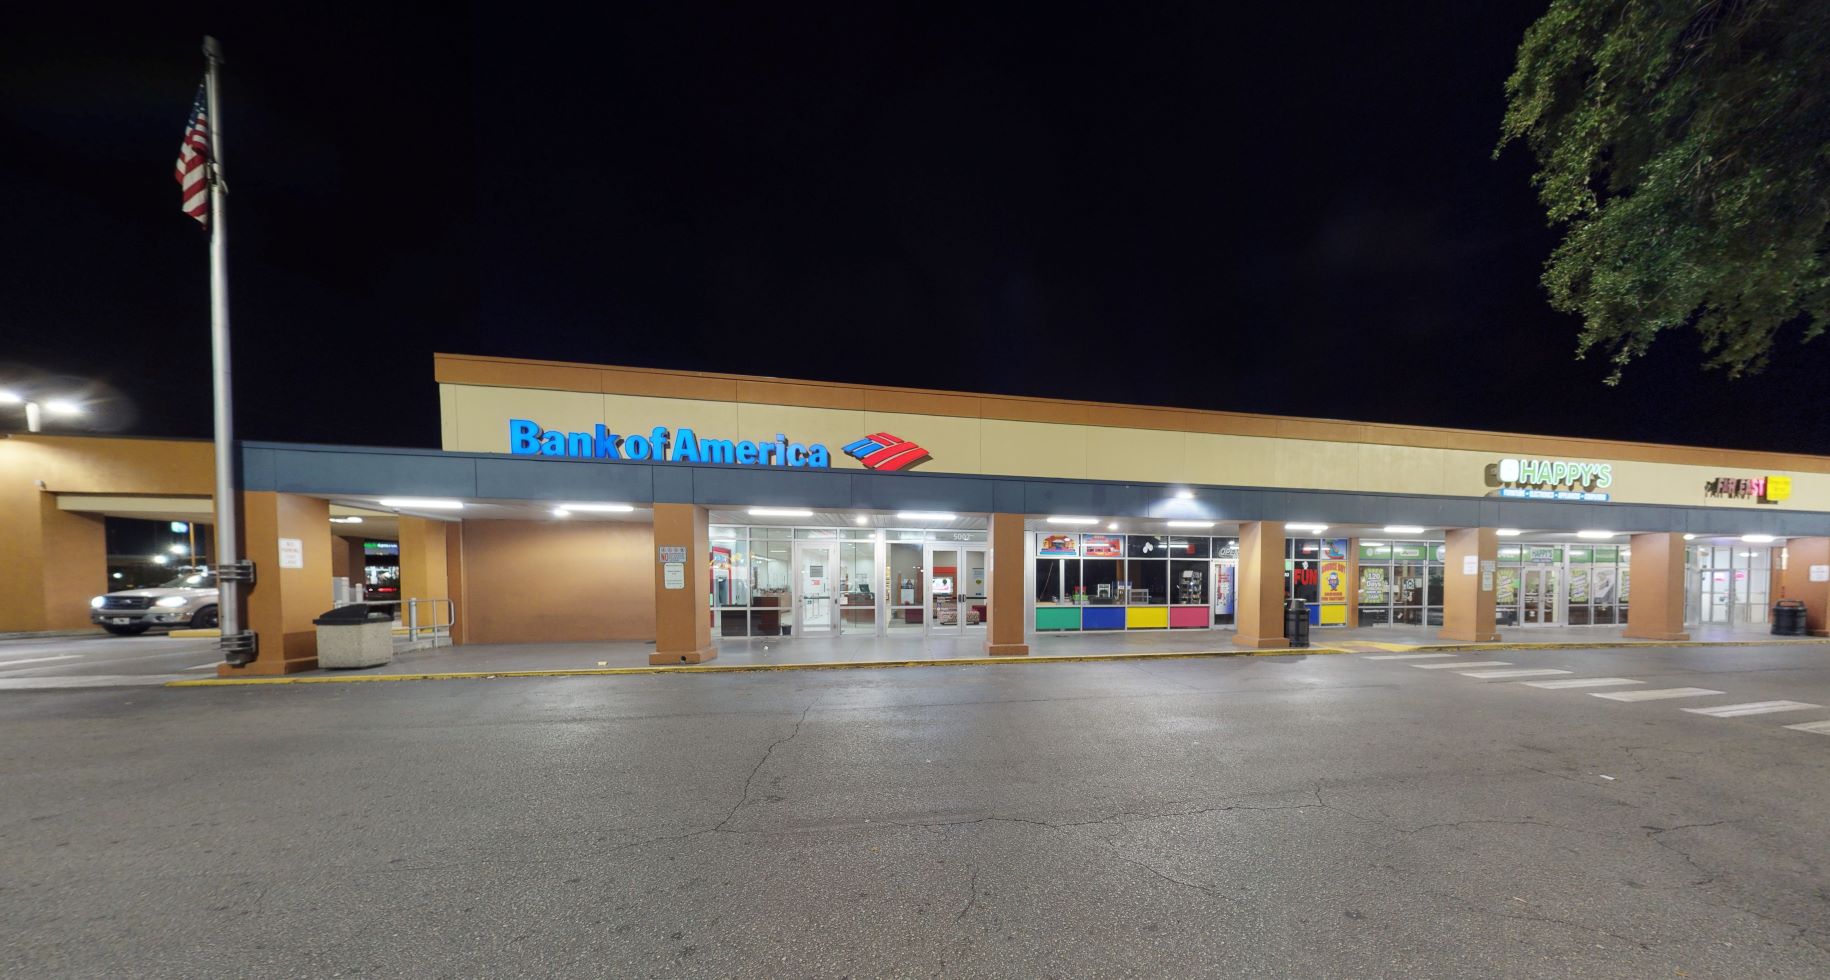 Bank of America financial center with drive-thru ATM | 5002 E 10th Ave, Tampa, FL 33619